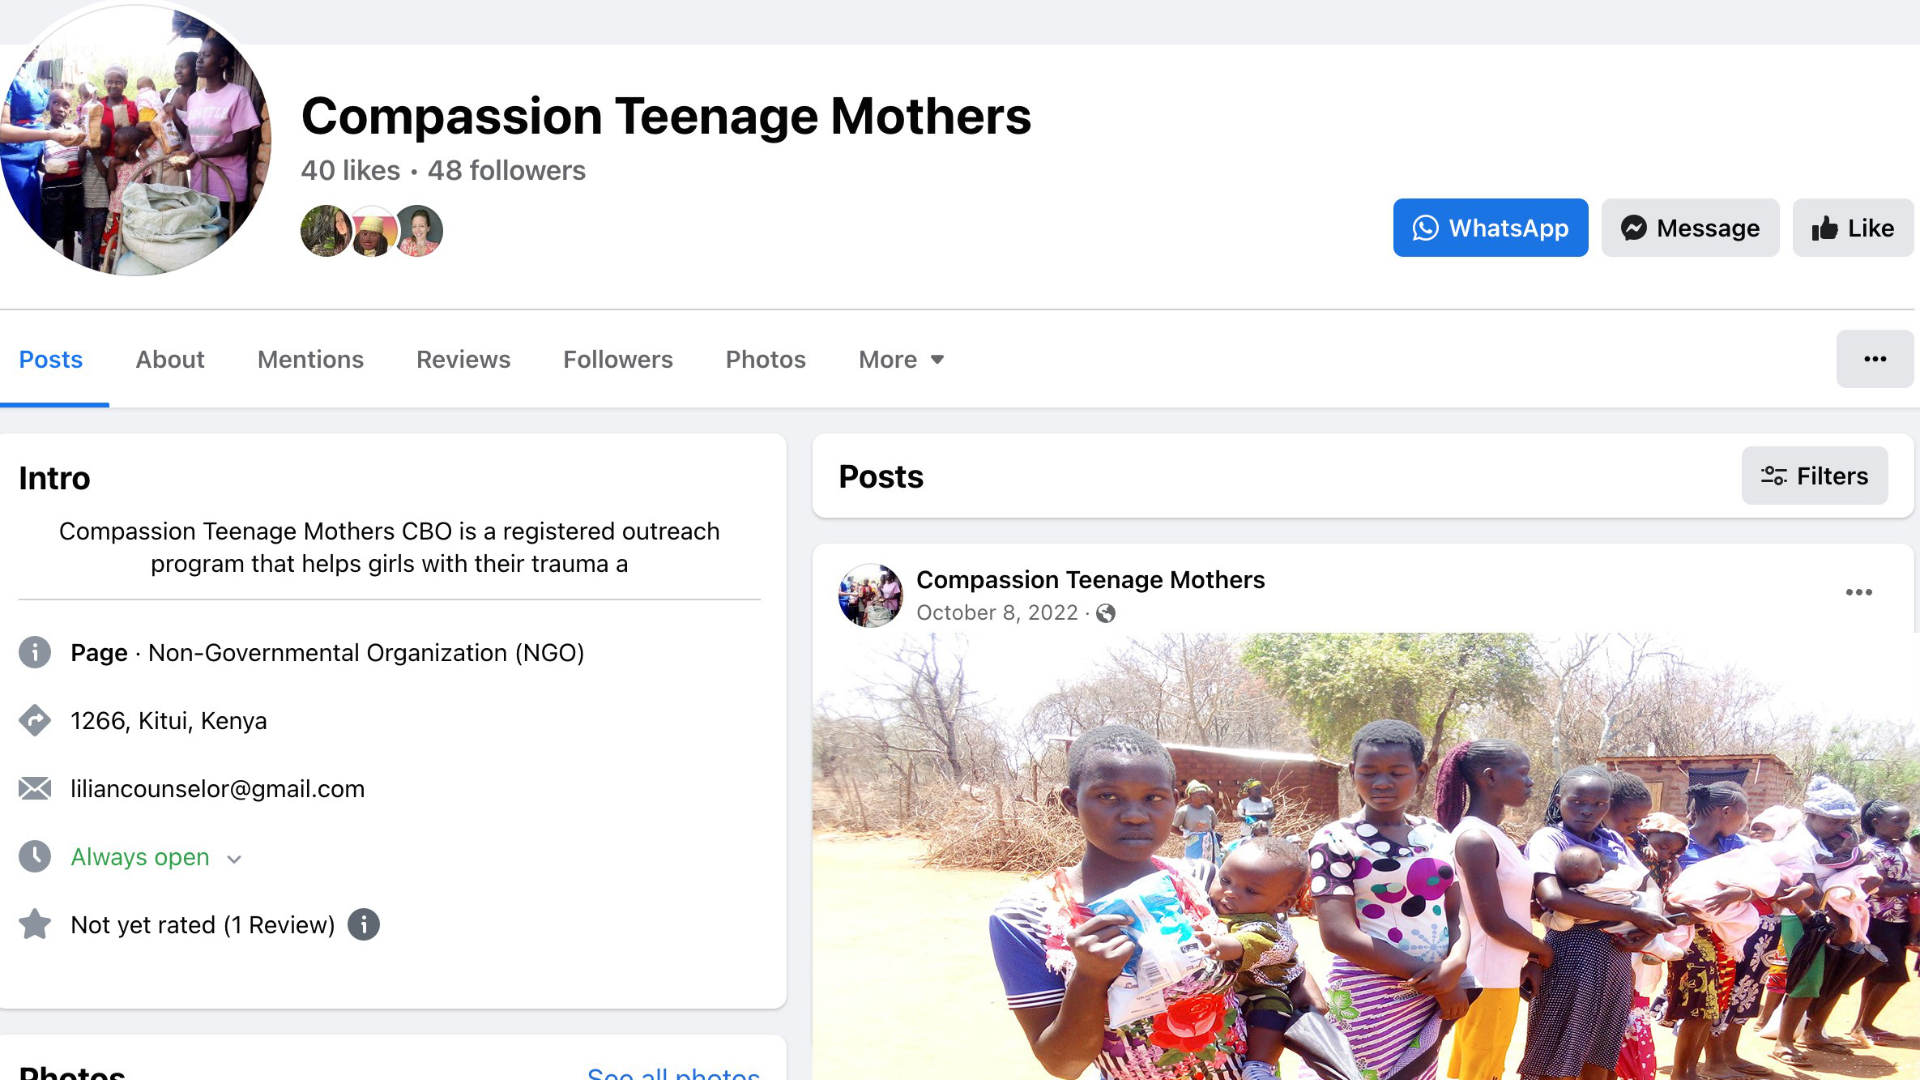 Compassion Teenage Mothers